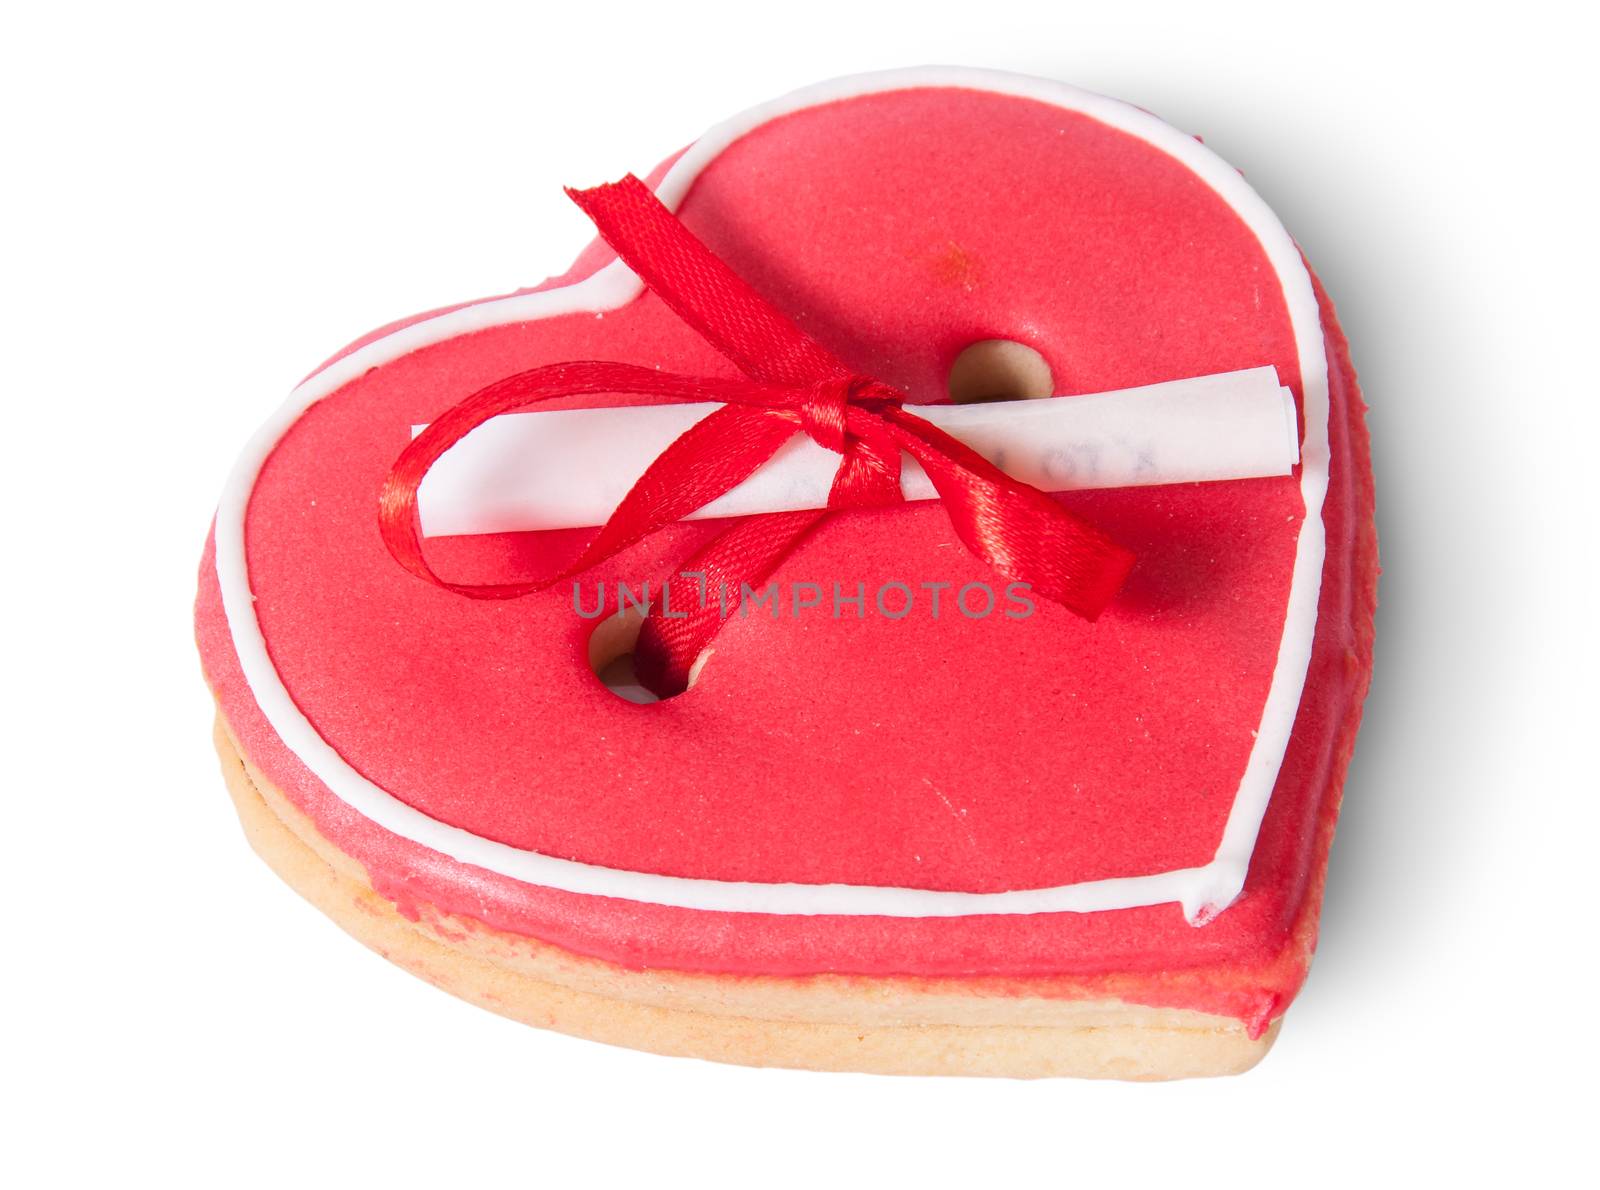 Cookies heart with note isolated on white background